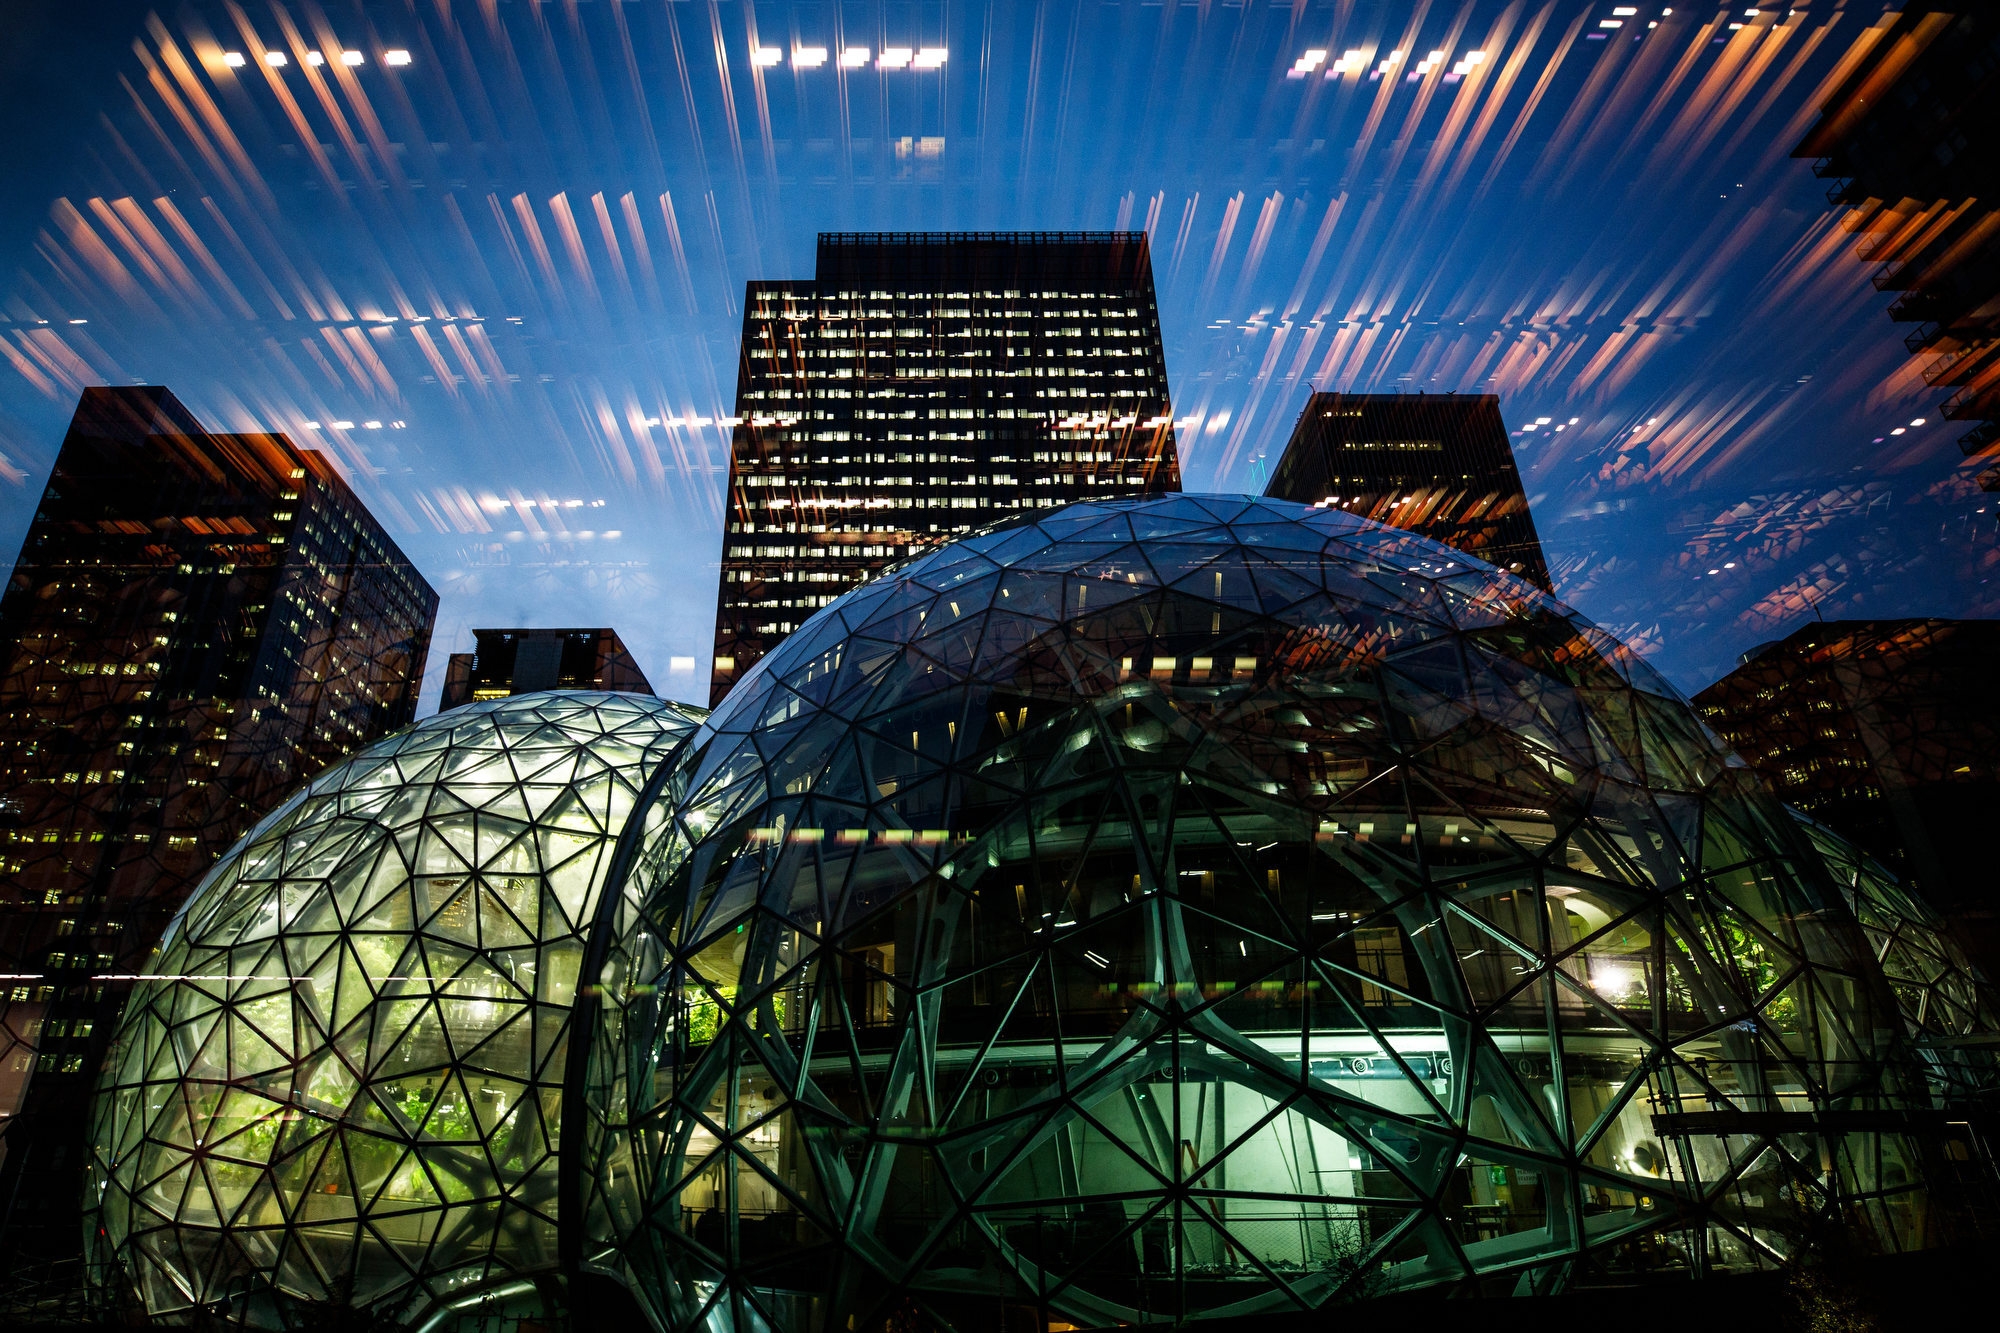 Amazon Spheres lit up at night, with lighting reflection in the glass. 